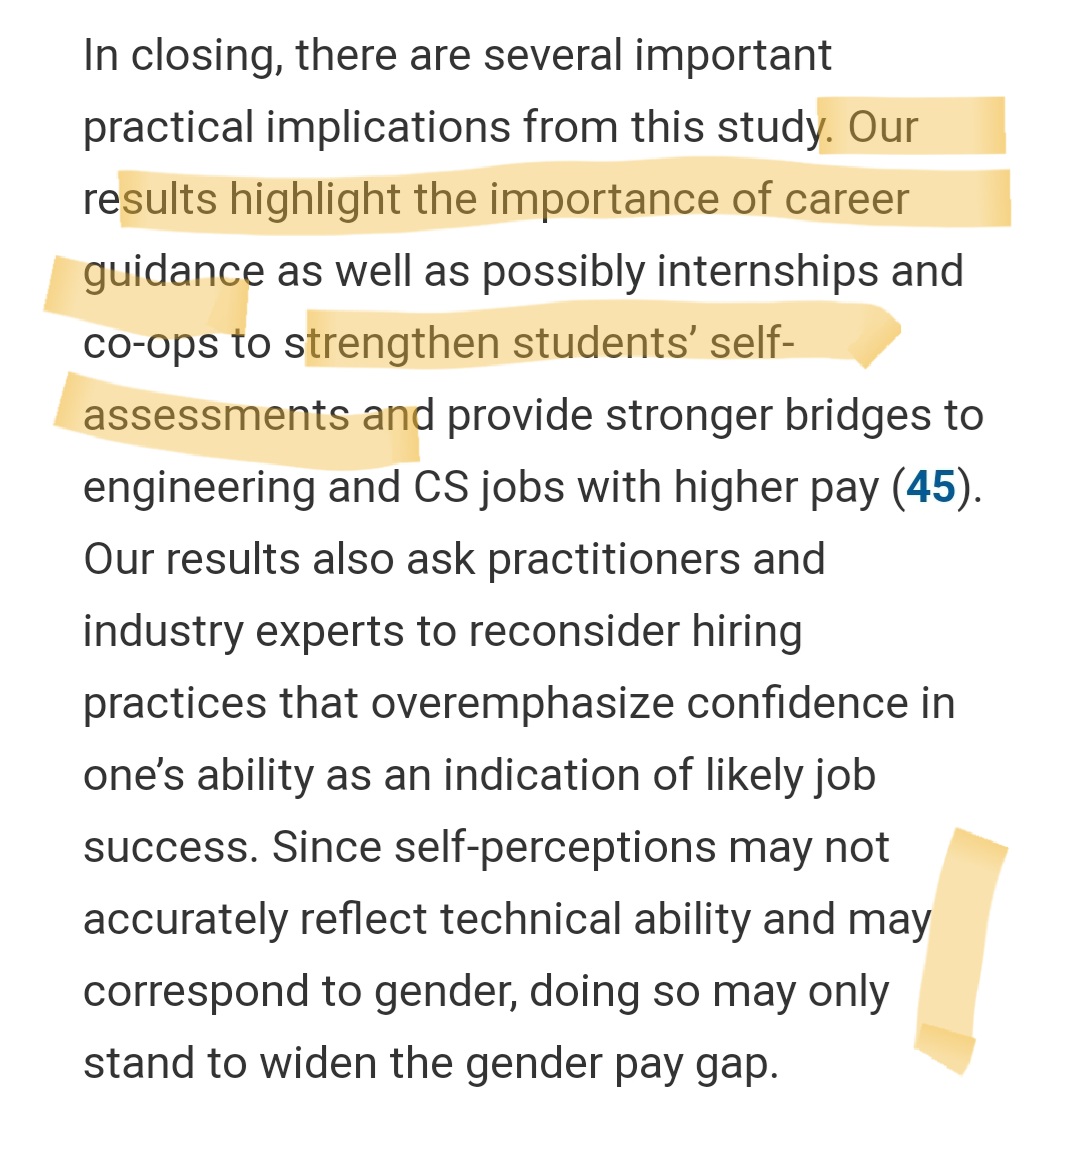 First, ok yes, the paper calls on organisations to look past confidence in its concluding comments. But it does this right at the end, after suggesting mentoring to "strengthen students self-assessments", i.e build the confidence of these poor widdle women